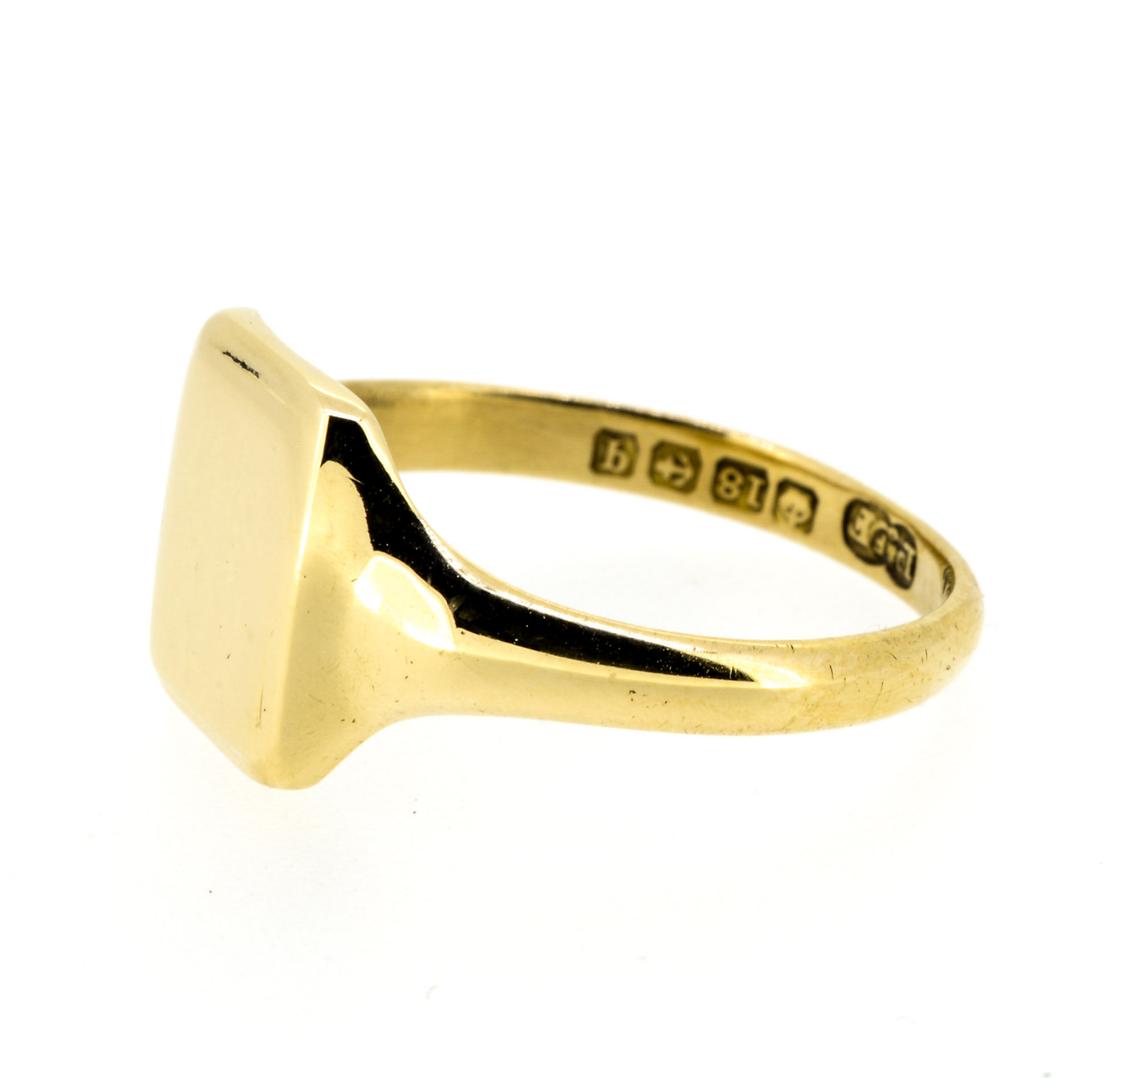 Early 20th Century 18ct Yellow Gold Signet Ring